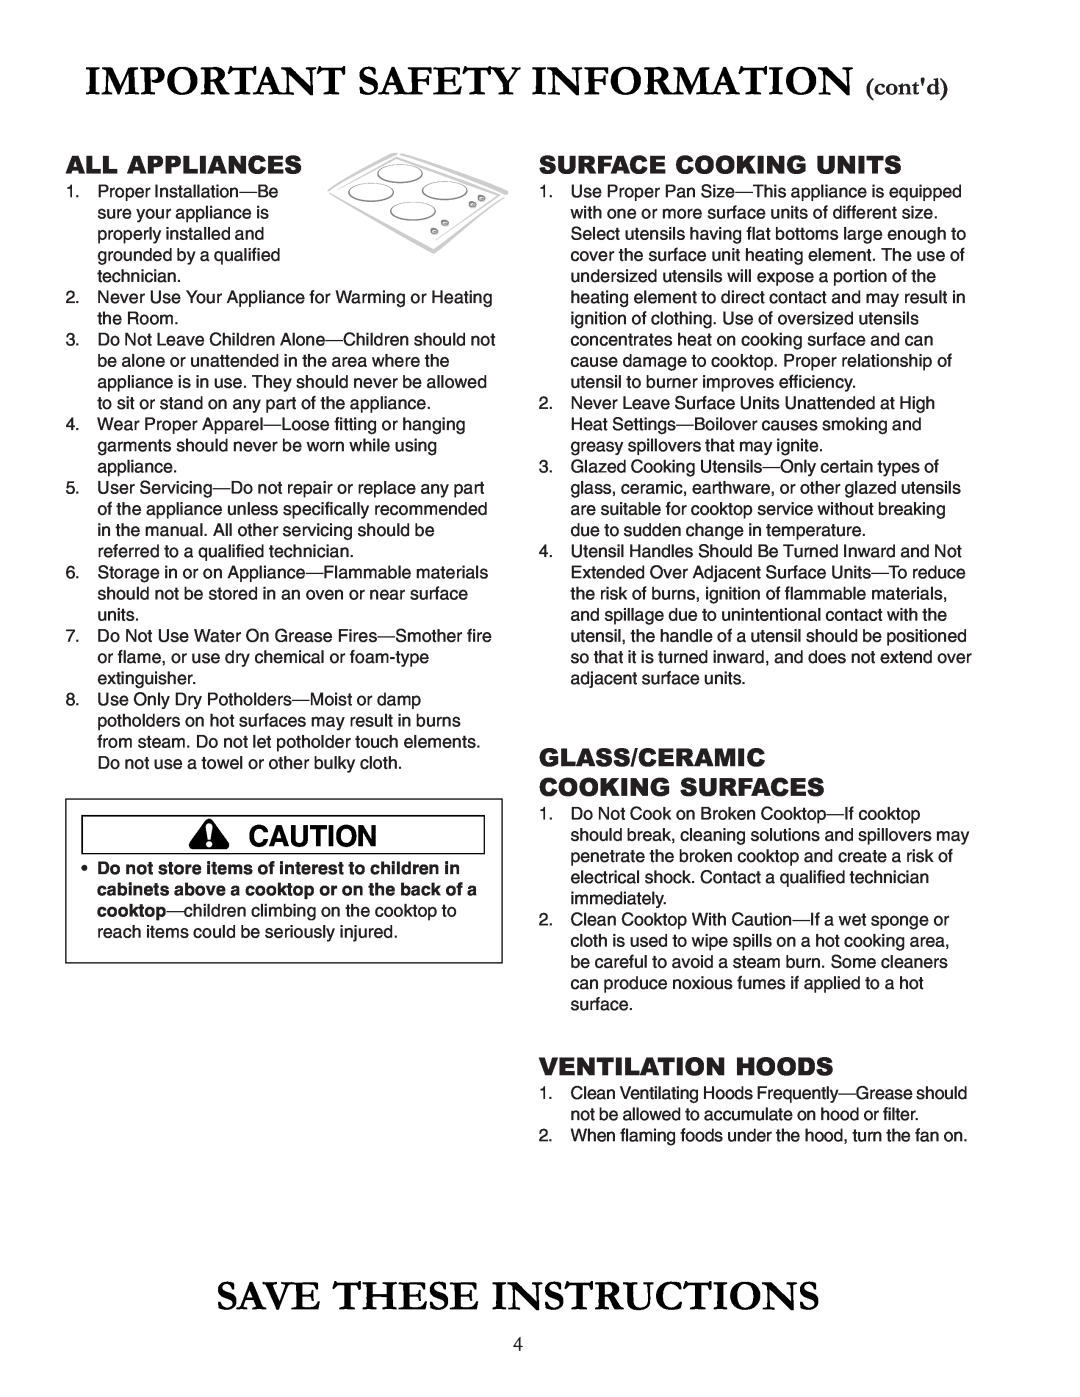 Cook Manufacturing akt3650 IMPORTANT SAFETY INFORMATION contd, All Appliances, Surface Cooking Units, Ventilation Hoods 